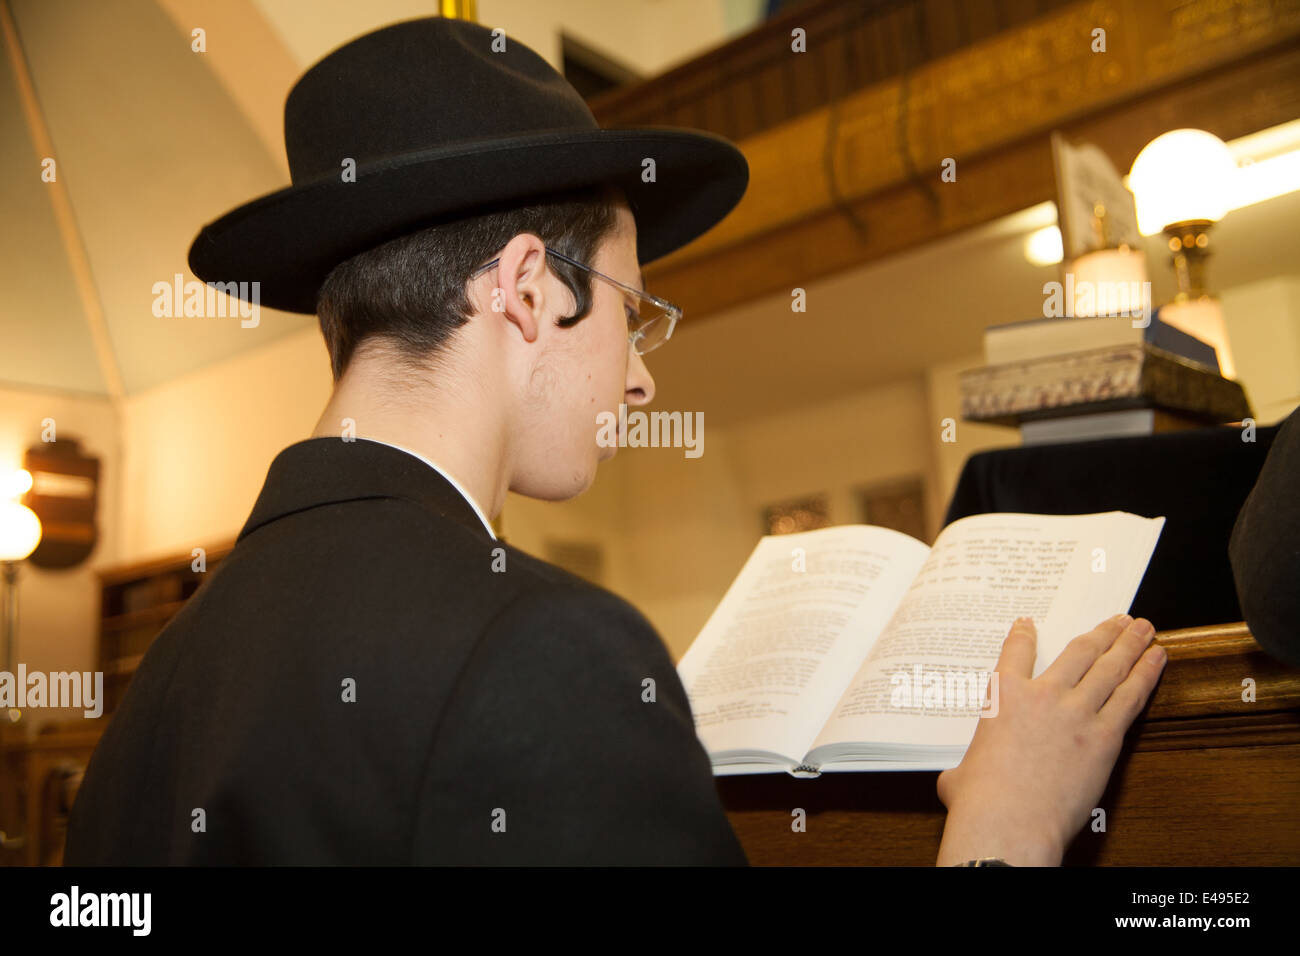 Orthodox Jewish man reads the Megillah 'The Scroll of Esther' during the Jewish festival of Purim. Stock Photo